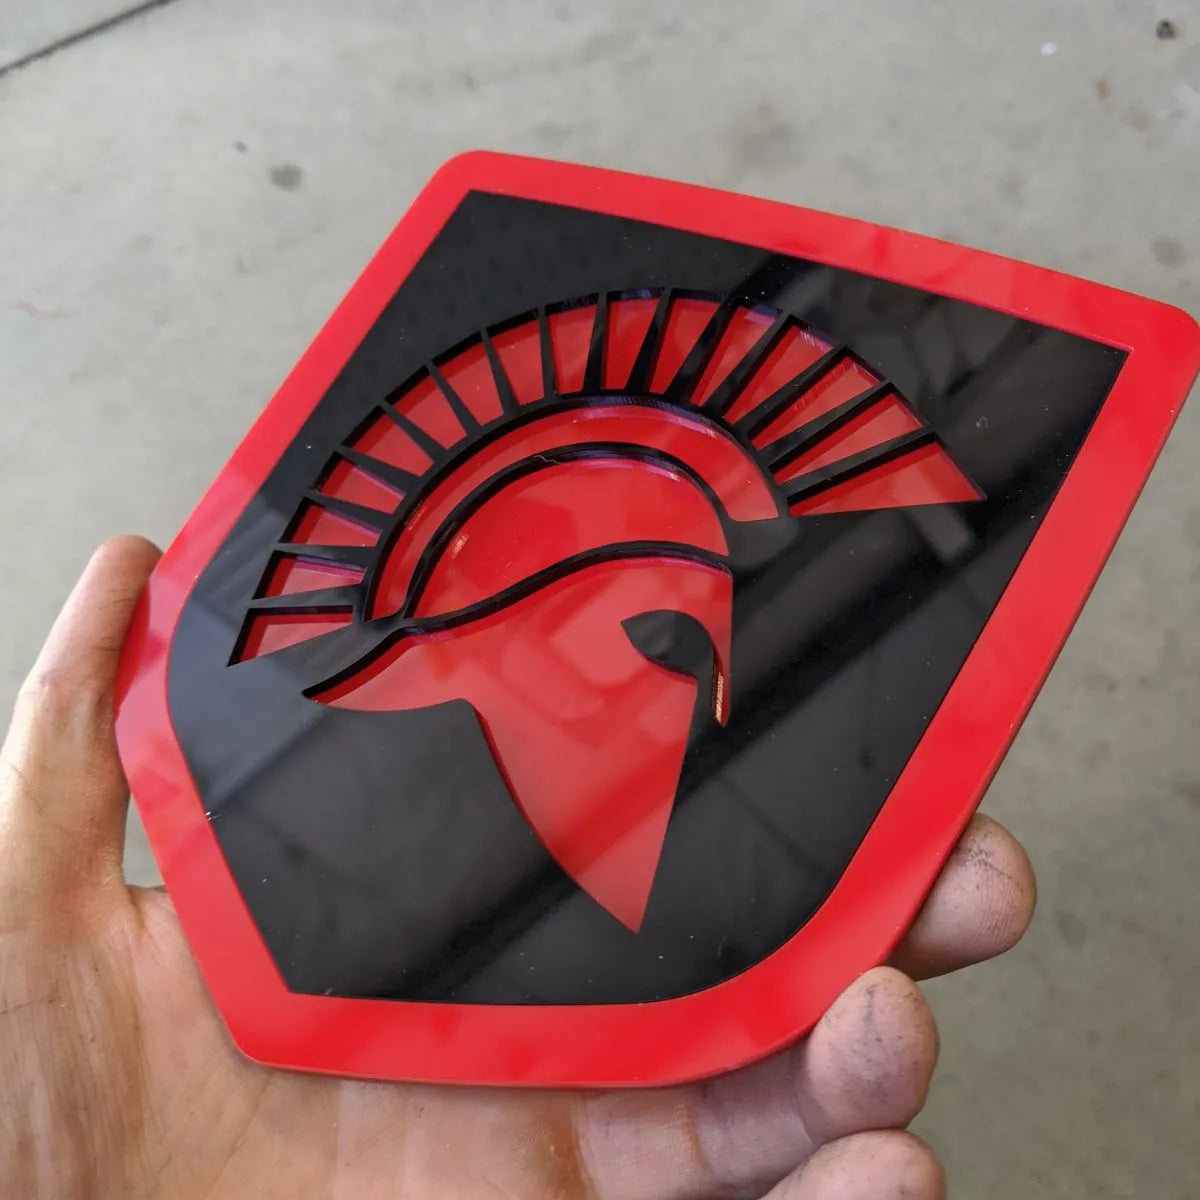 Spartan Badge - Fits 2009-2018 Dodge® Ram® Tailgate -1500, 2500, 3500 - Red and Black